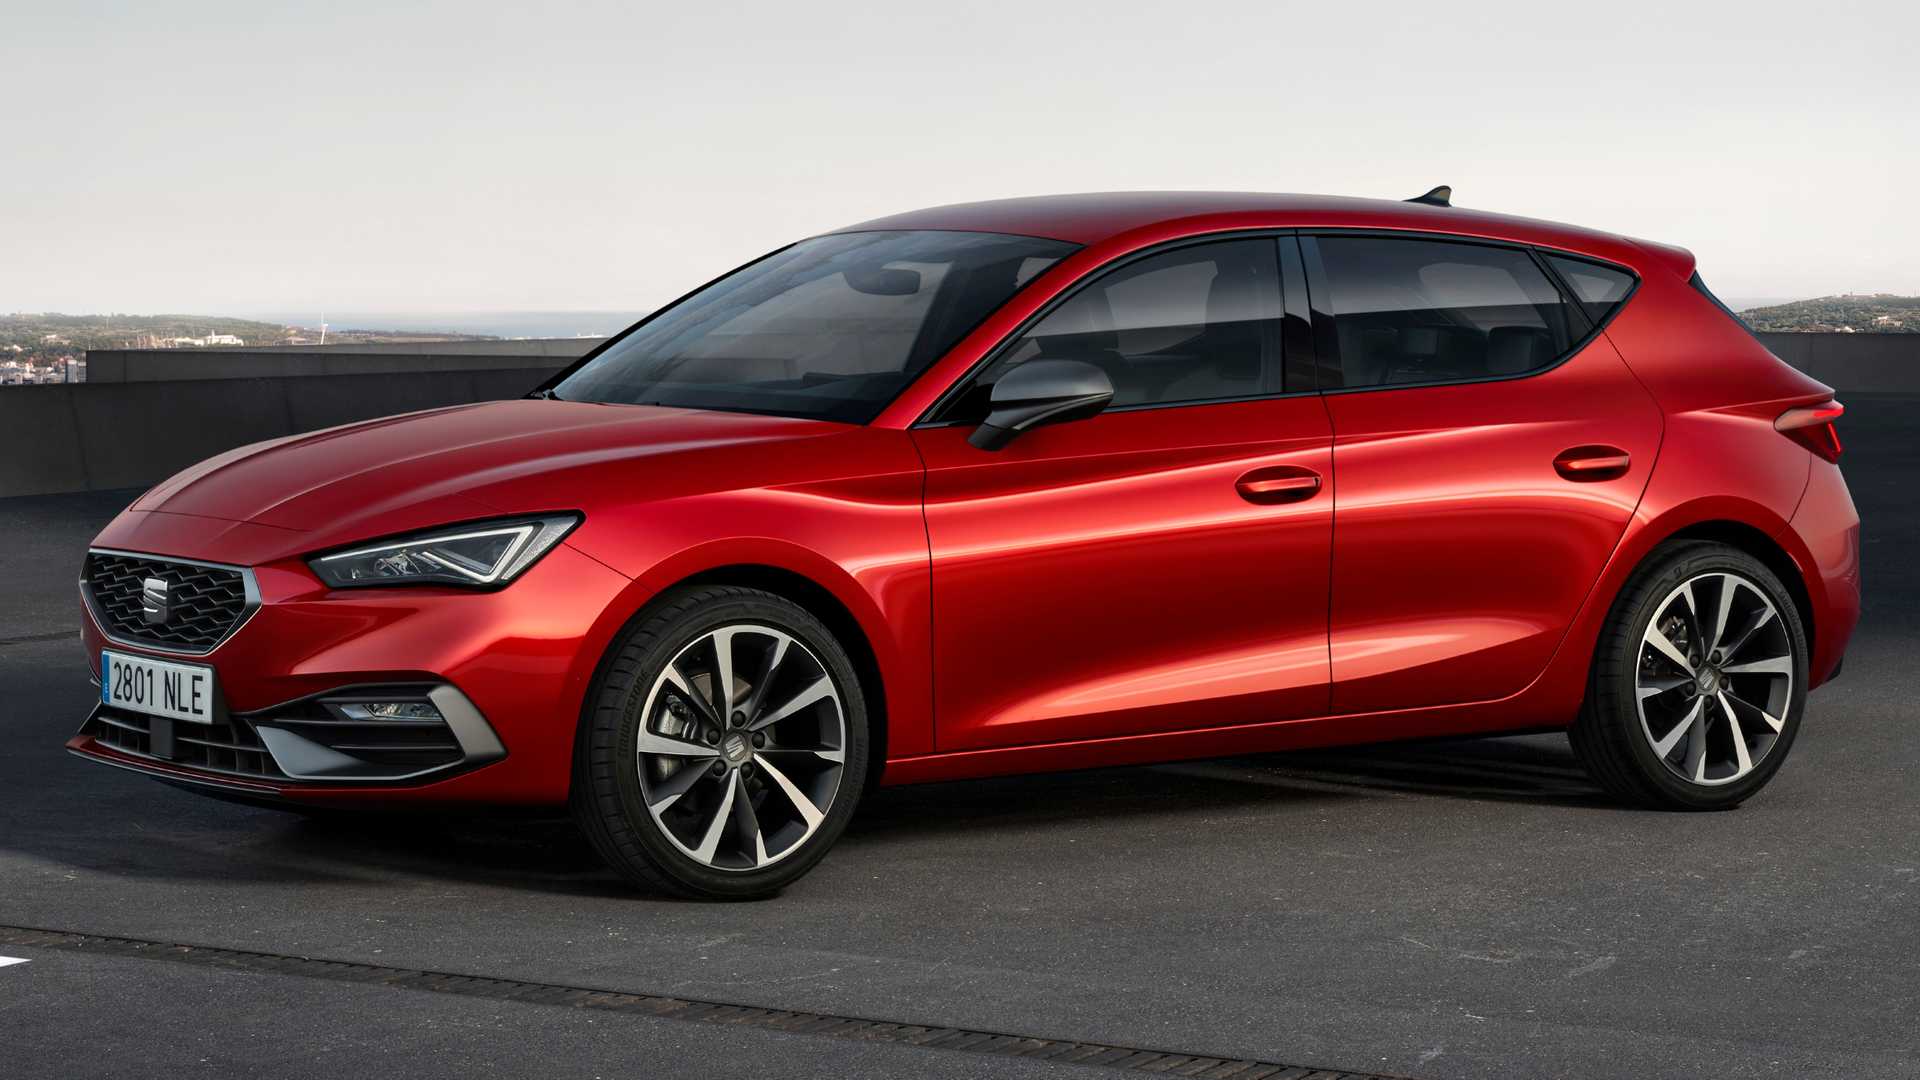 SEAT Leon Videos Detail The All New Design Inside